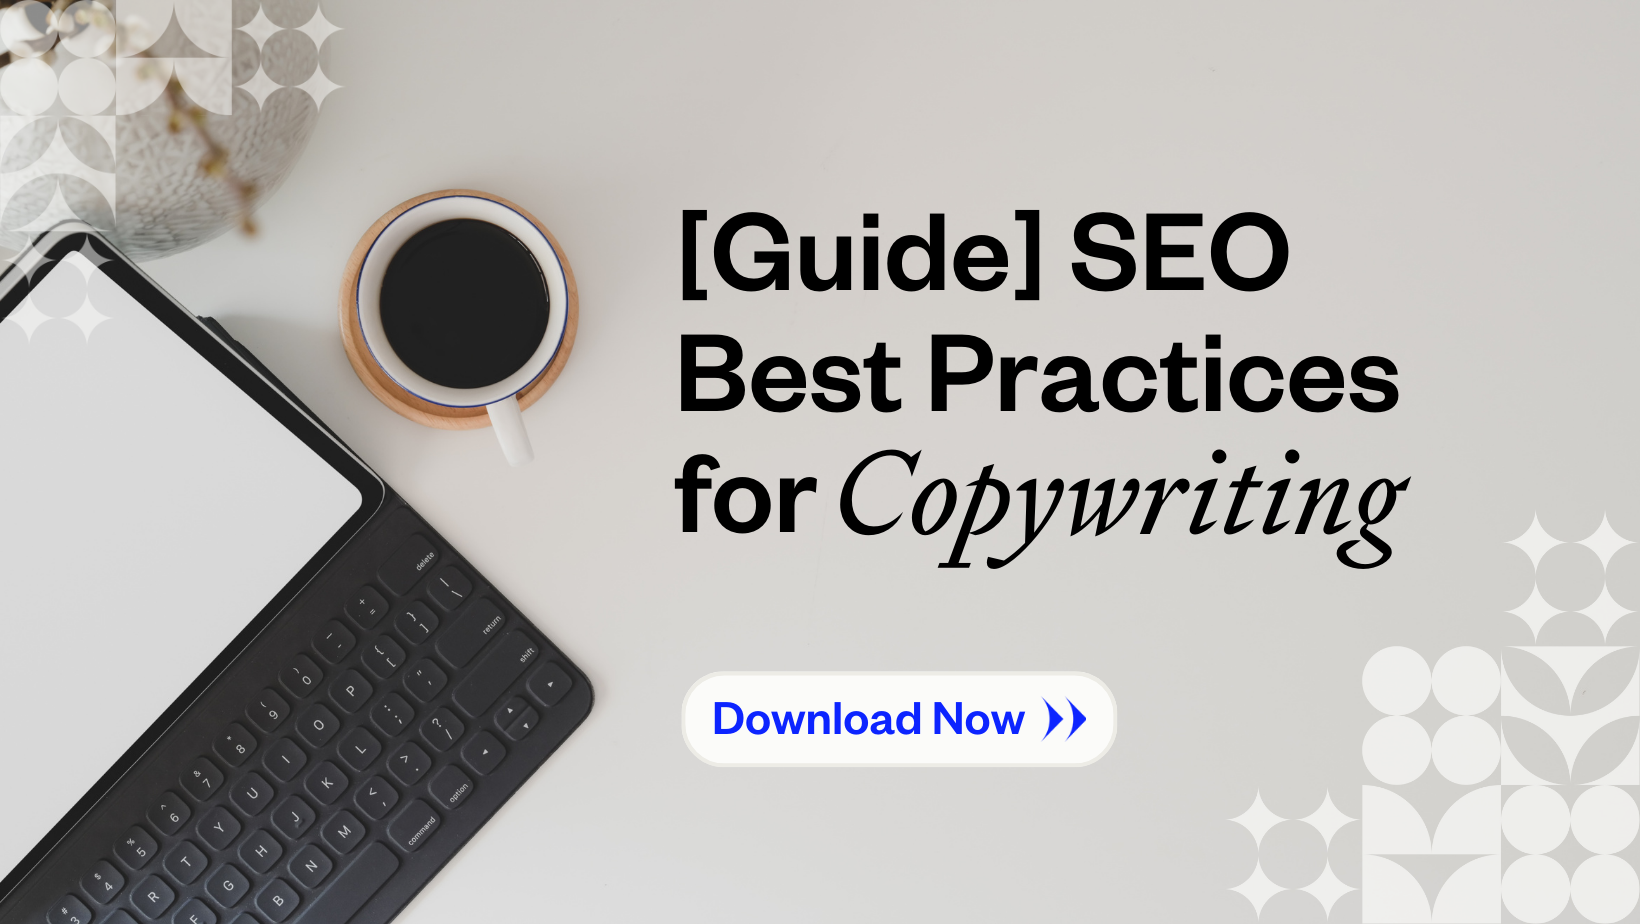 Guide SEO for Best Practices Download Button